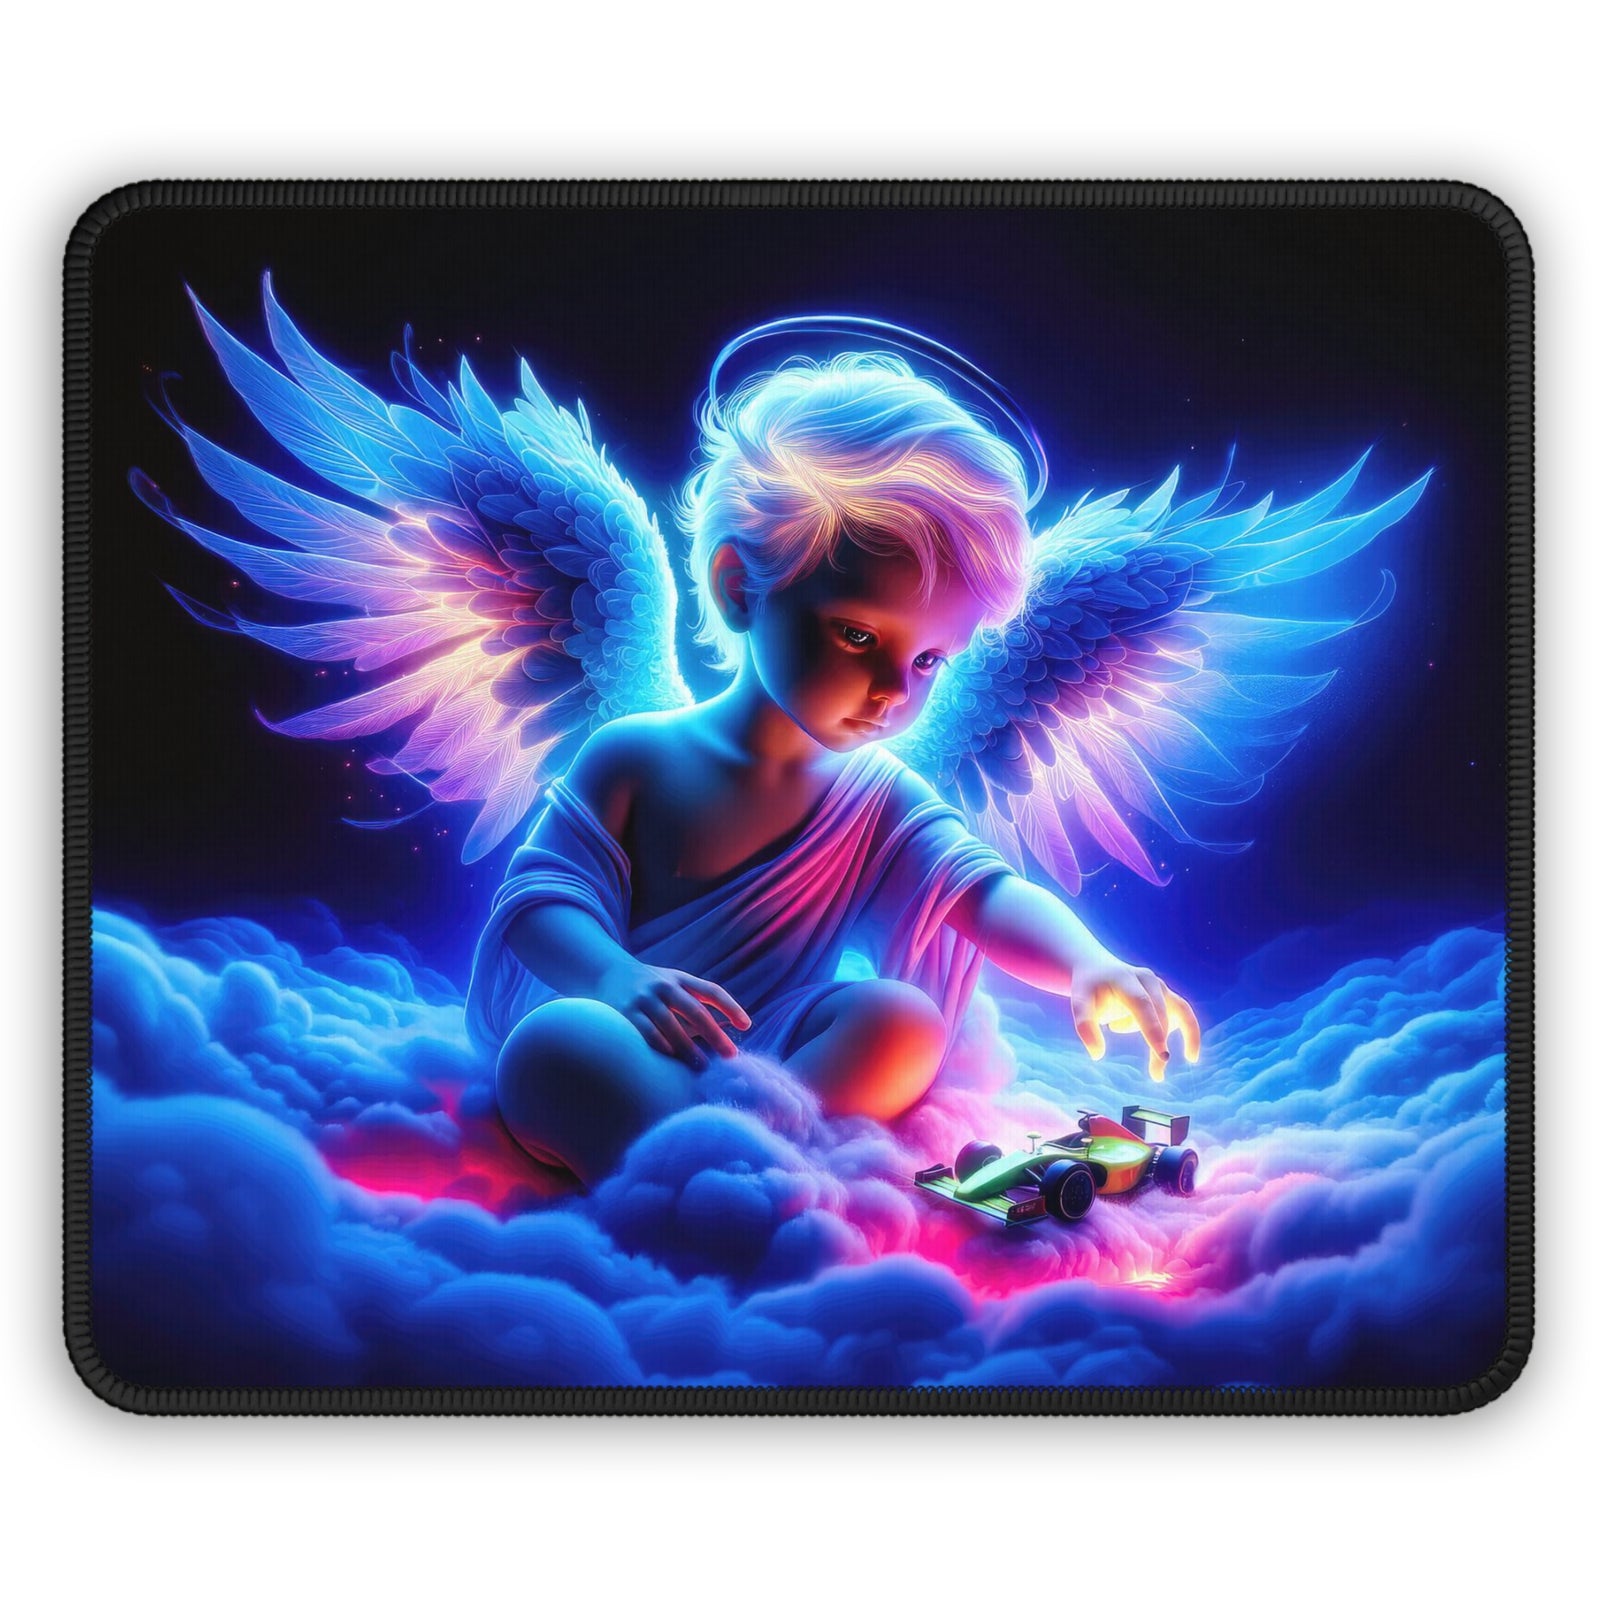 Playtime in the Cosmic Clouds Gaming Mouse Pad